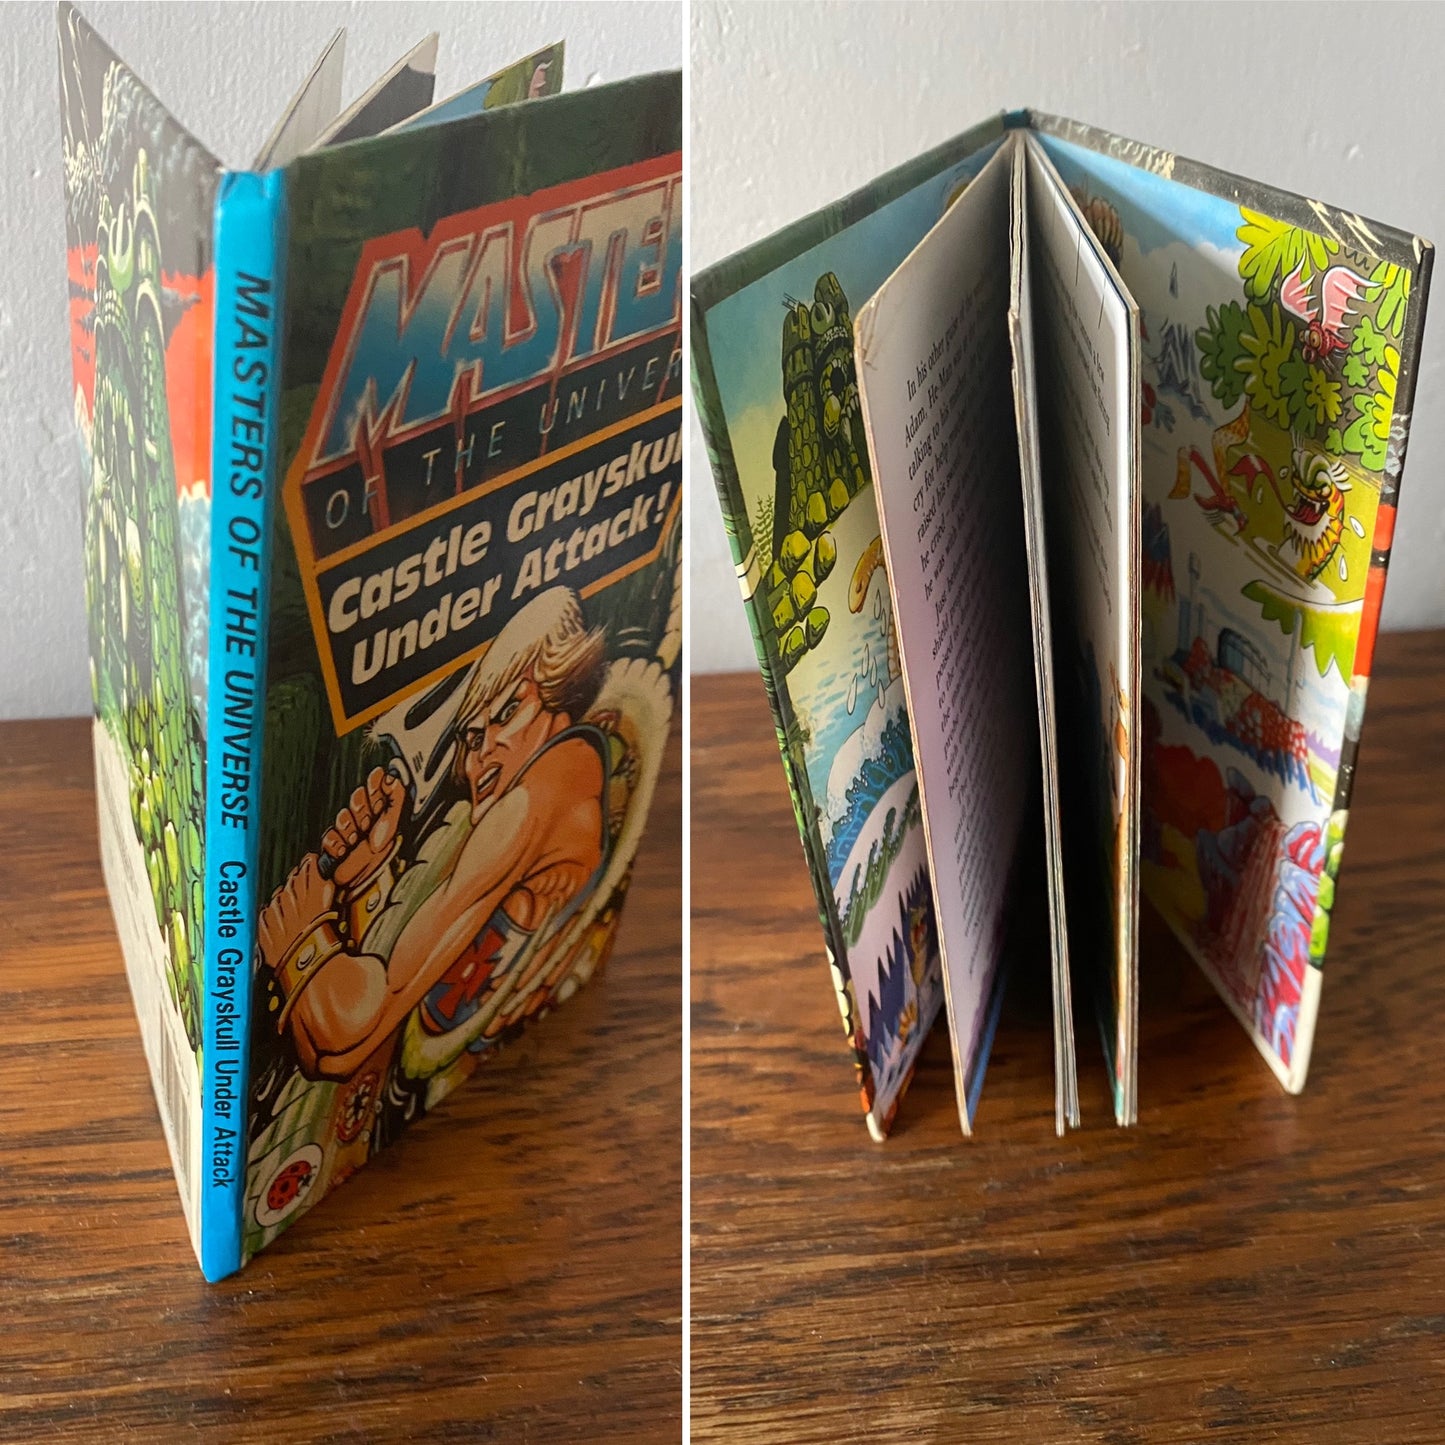 Castle Grayskull Under Attack ! He - Man. Masters of the Universe. Vintage ladybird book. Great gift idea